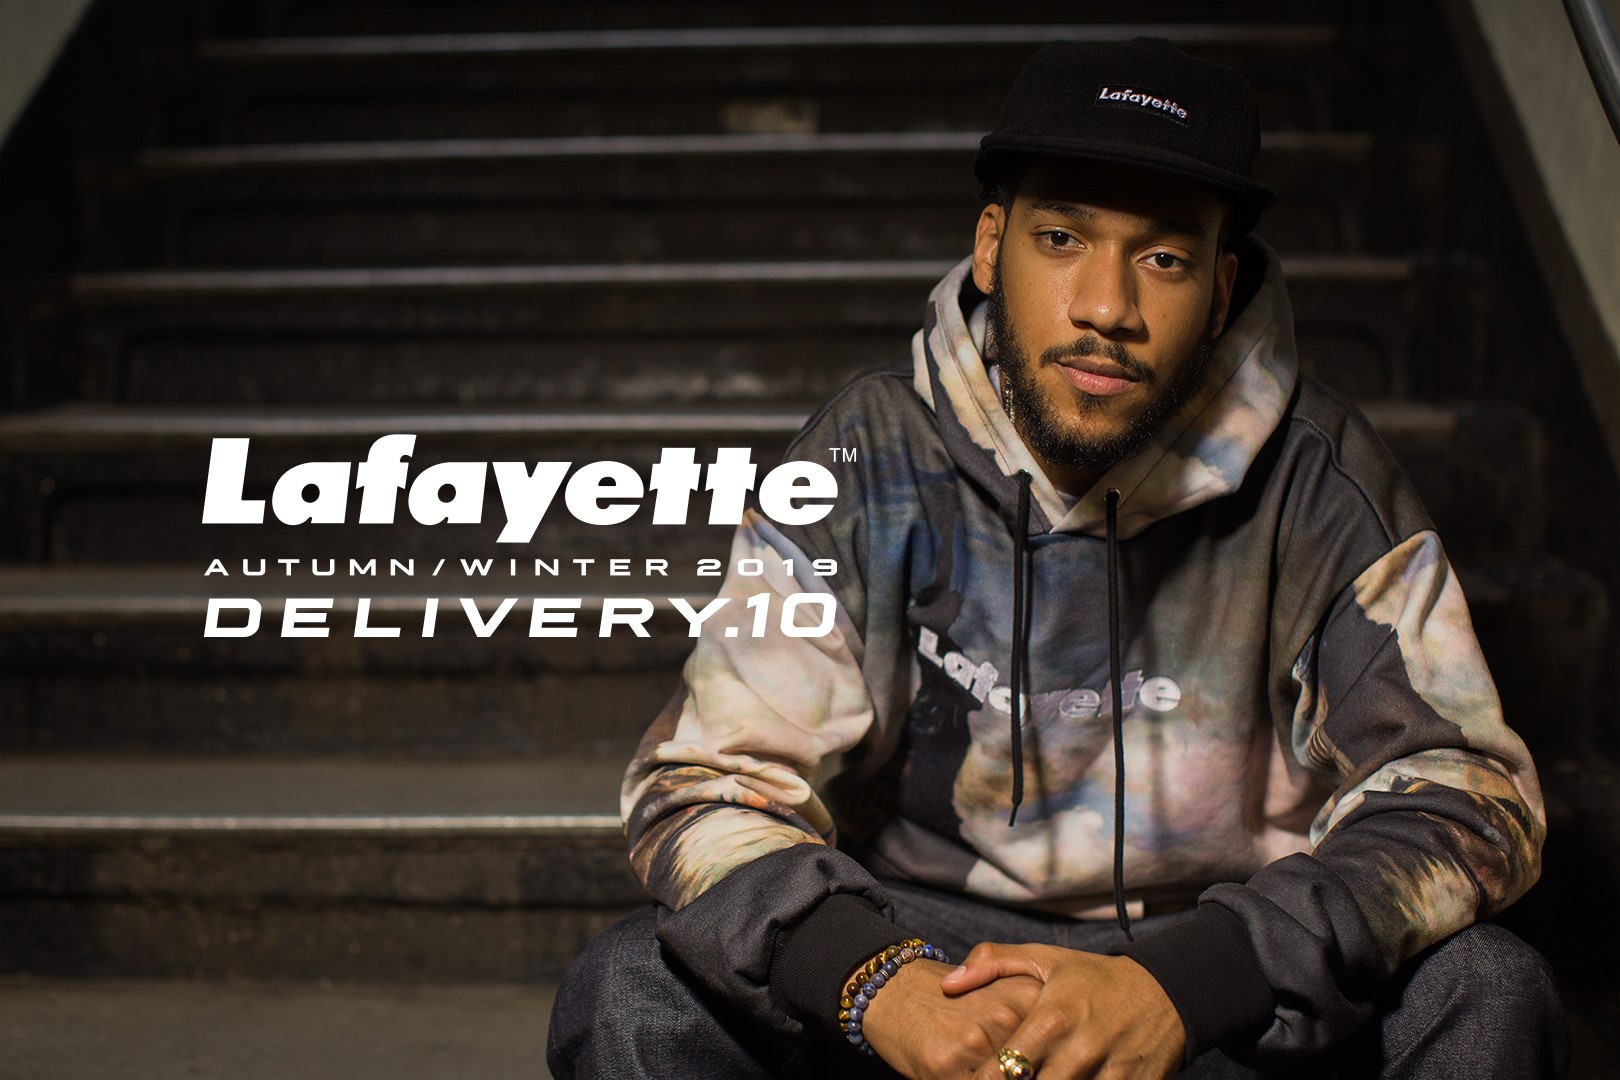 Lafayette 2019 Autumn/Winter Collection Delivery.10